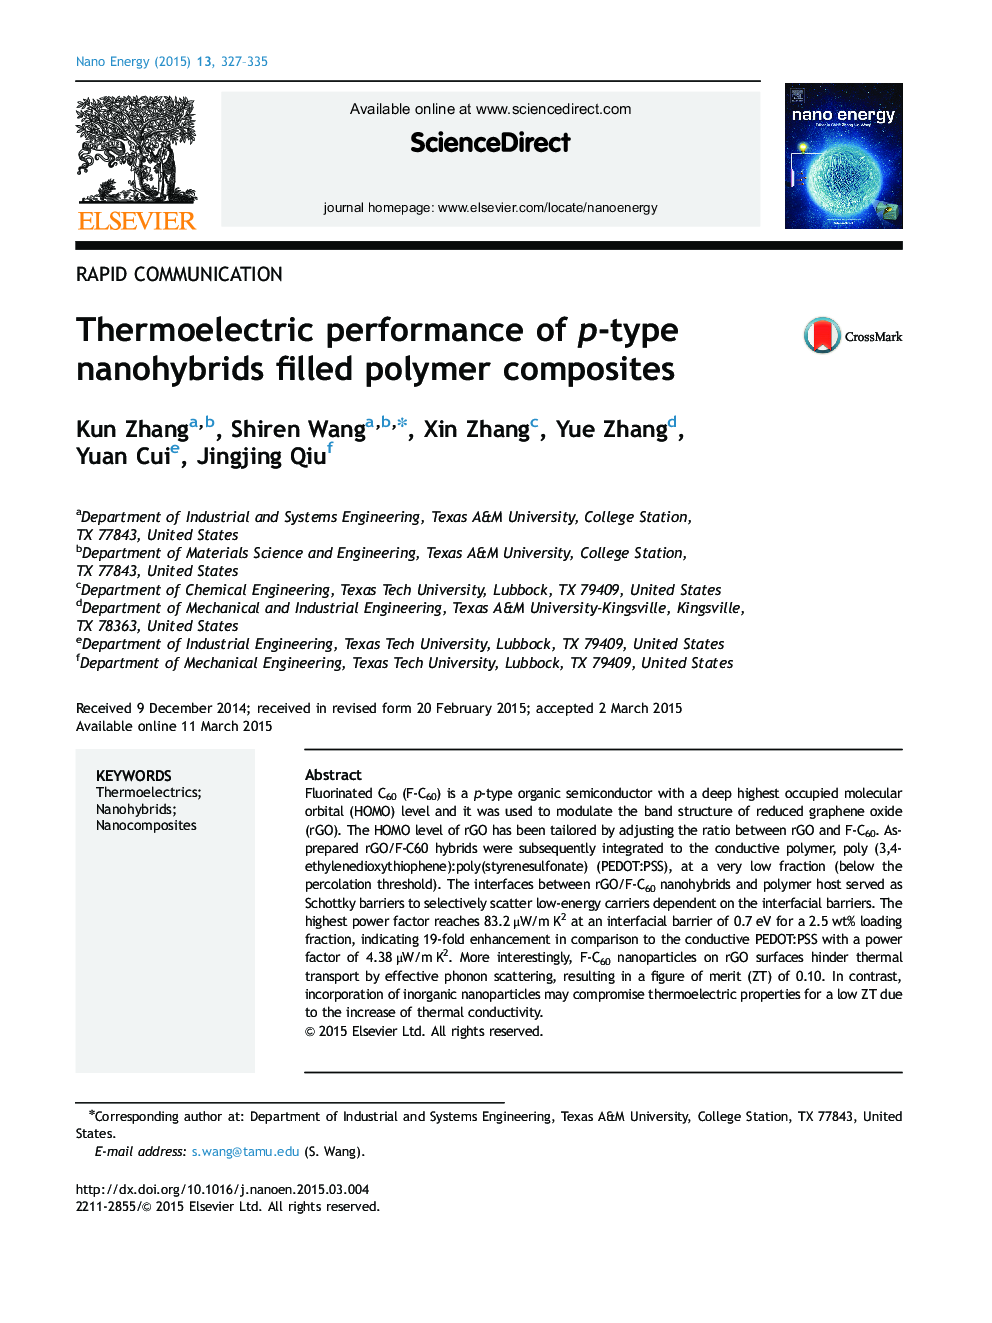 Thermoelectric performance of p-type nanohybrids filled polymer composites